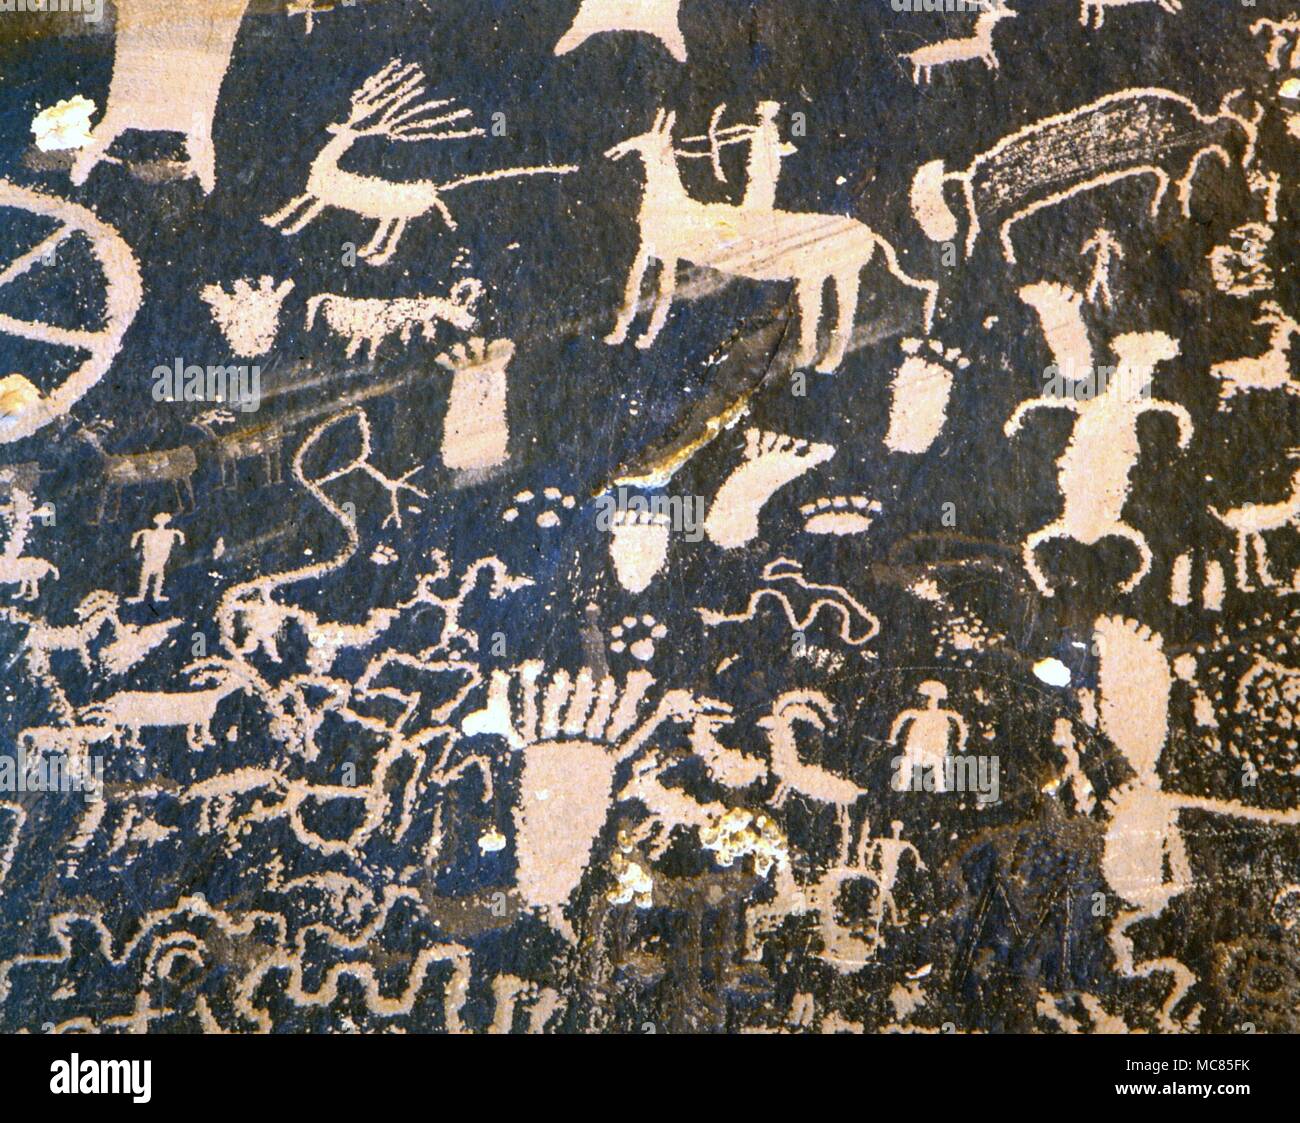 Petroglyphs - North American Indians. Incised and painted designs (petroglyphs) depicting gods, medecine-men, cattle, serpents, or serpent lines, and a variety of other symbols, including 'prints' of human feet. These petroglyphs are on the so-called Newspaper rock, in the Utah desert. Stock Photo